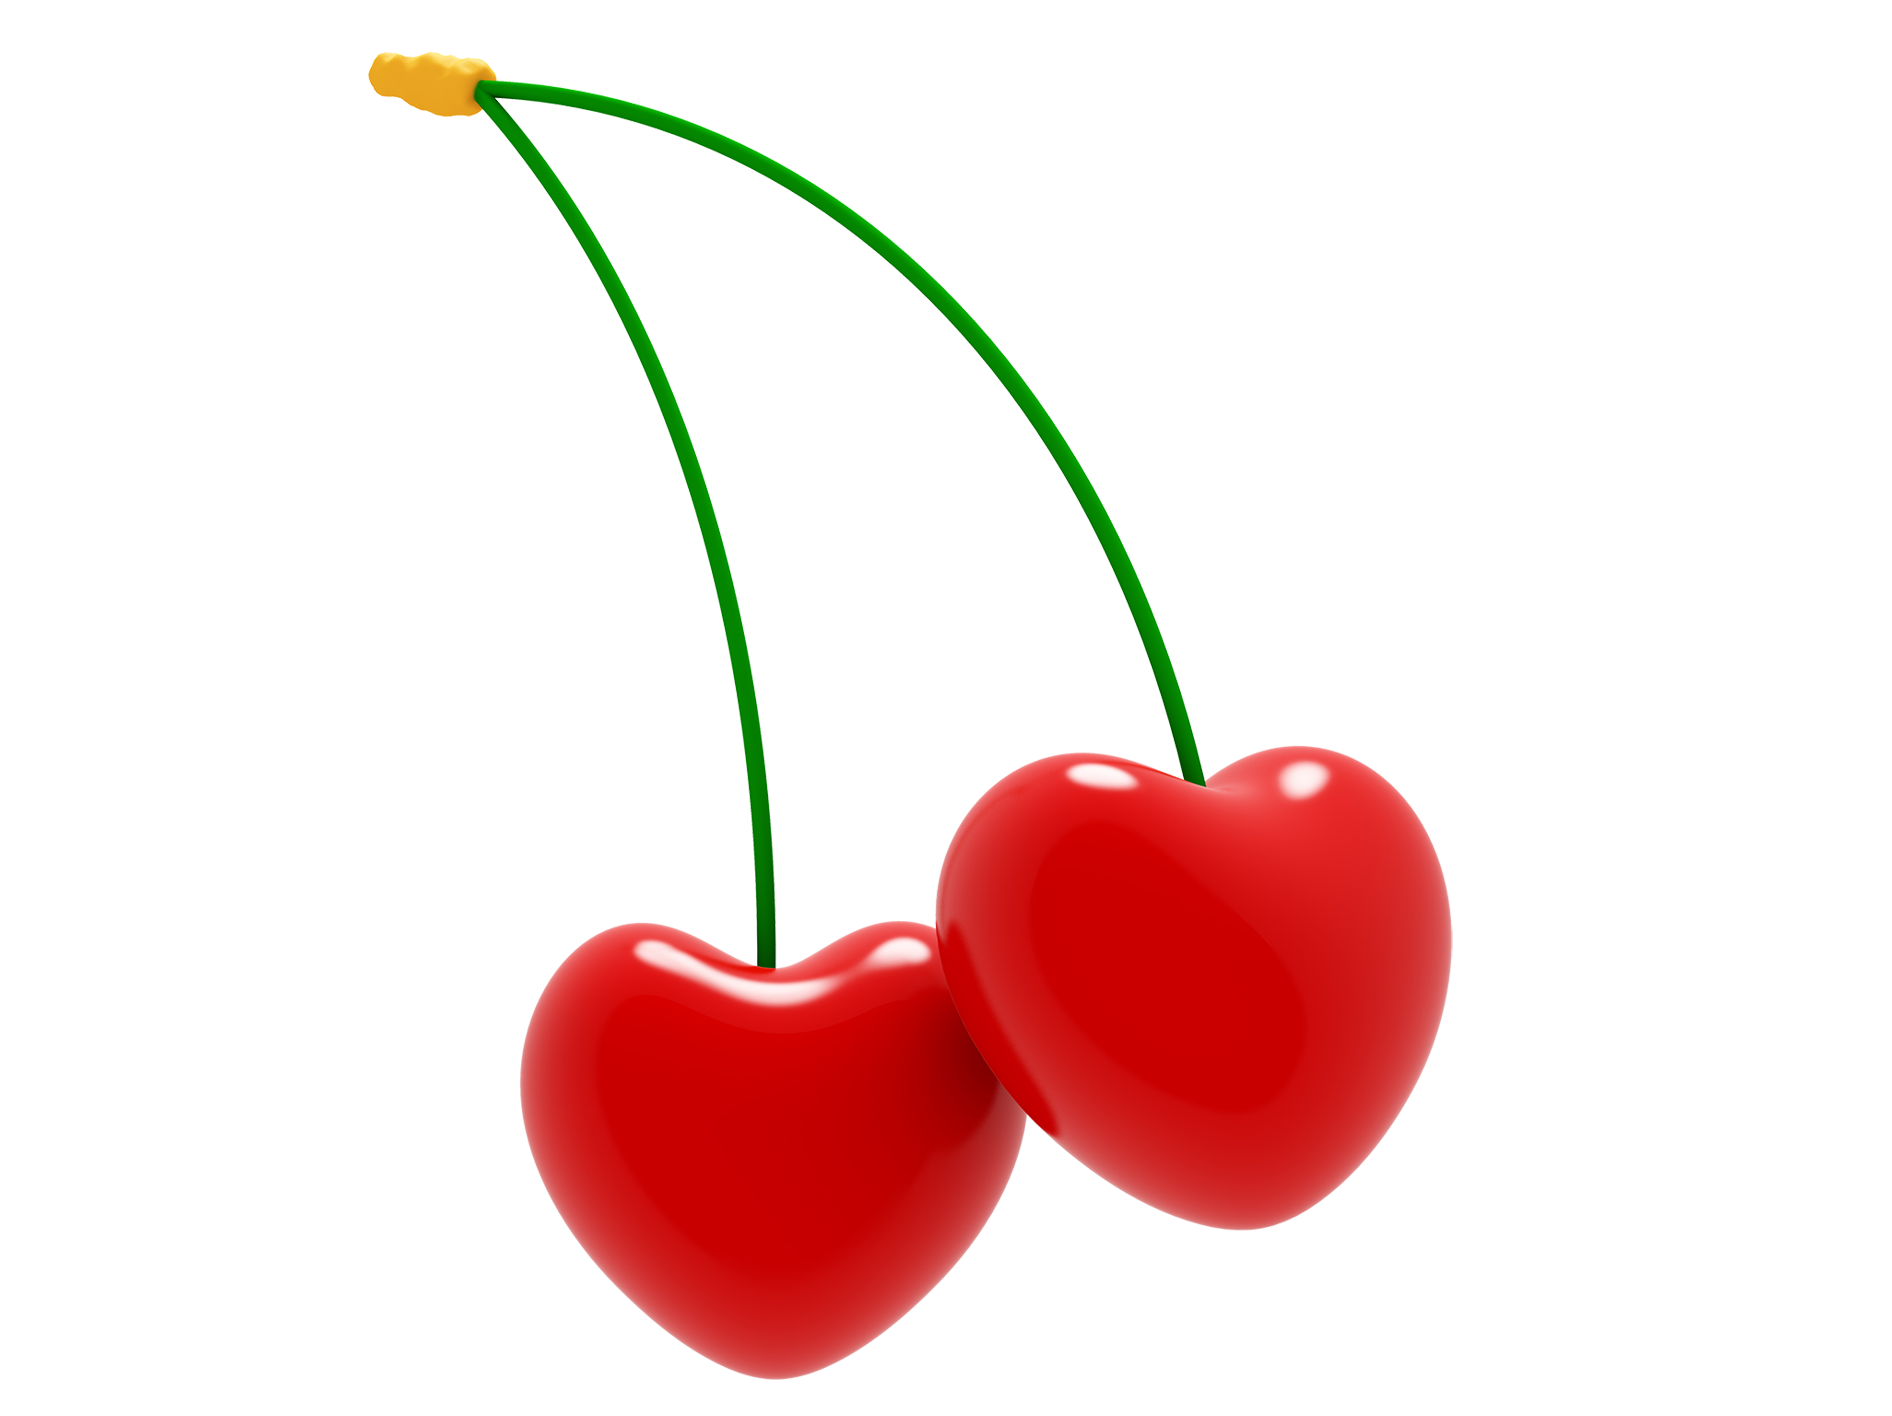 Cherry Heart Gratis Cherry Love Png Download 1892 1416 Free Transparent Cherry Png Download Clip Art Library